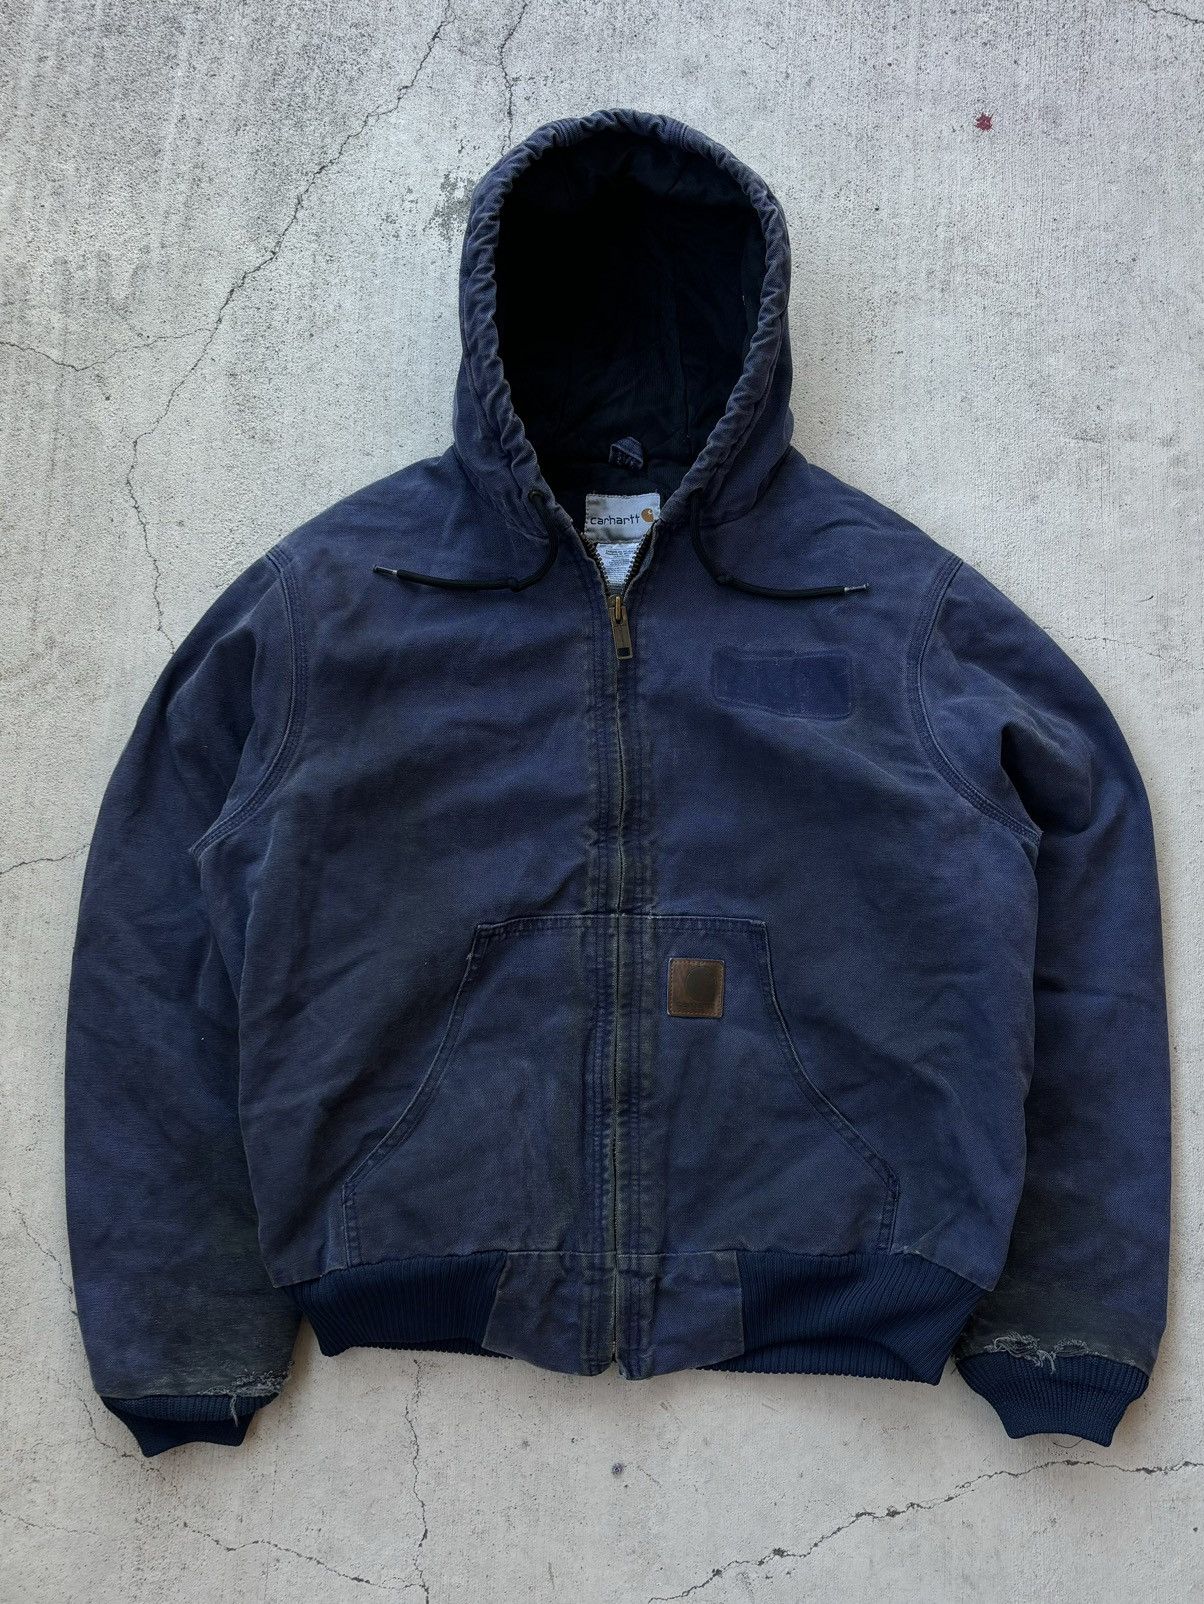 Pre-owned Carhartt X Vintage 90's Faded Blue Carhartt Rocky Hooded Jacket L